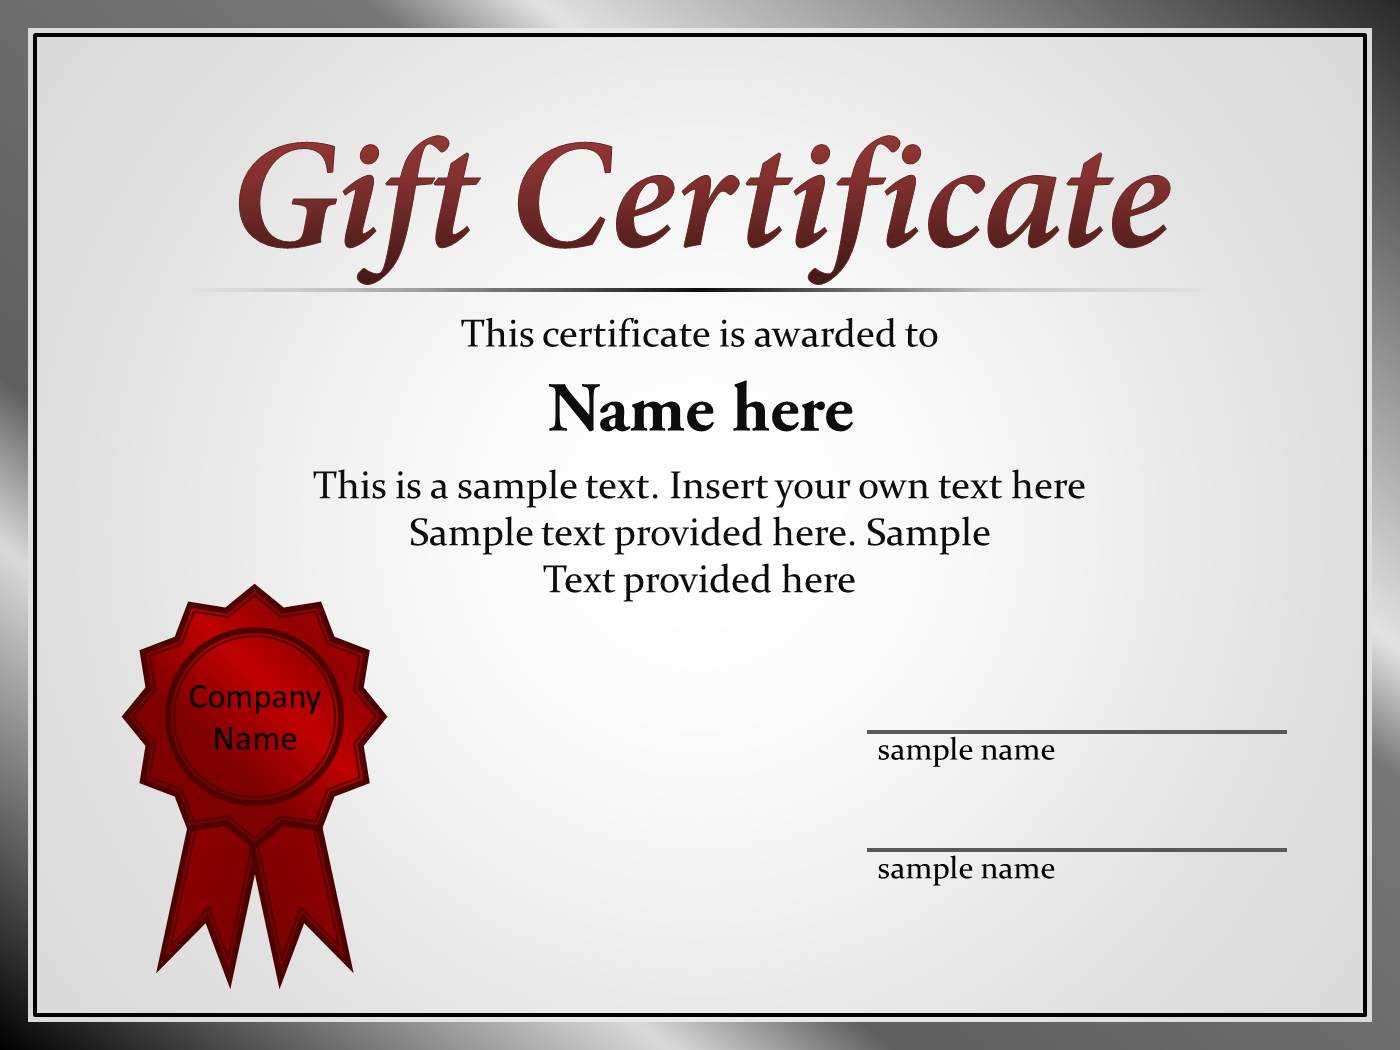 D3018 Ppt Certificate Template | Wiring Library Regarding Funny Certificates For Employees Templates